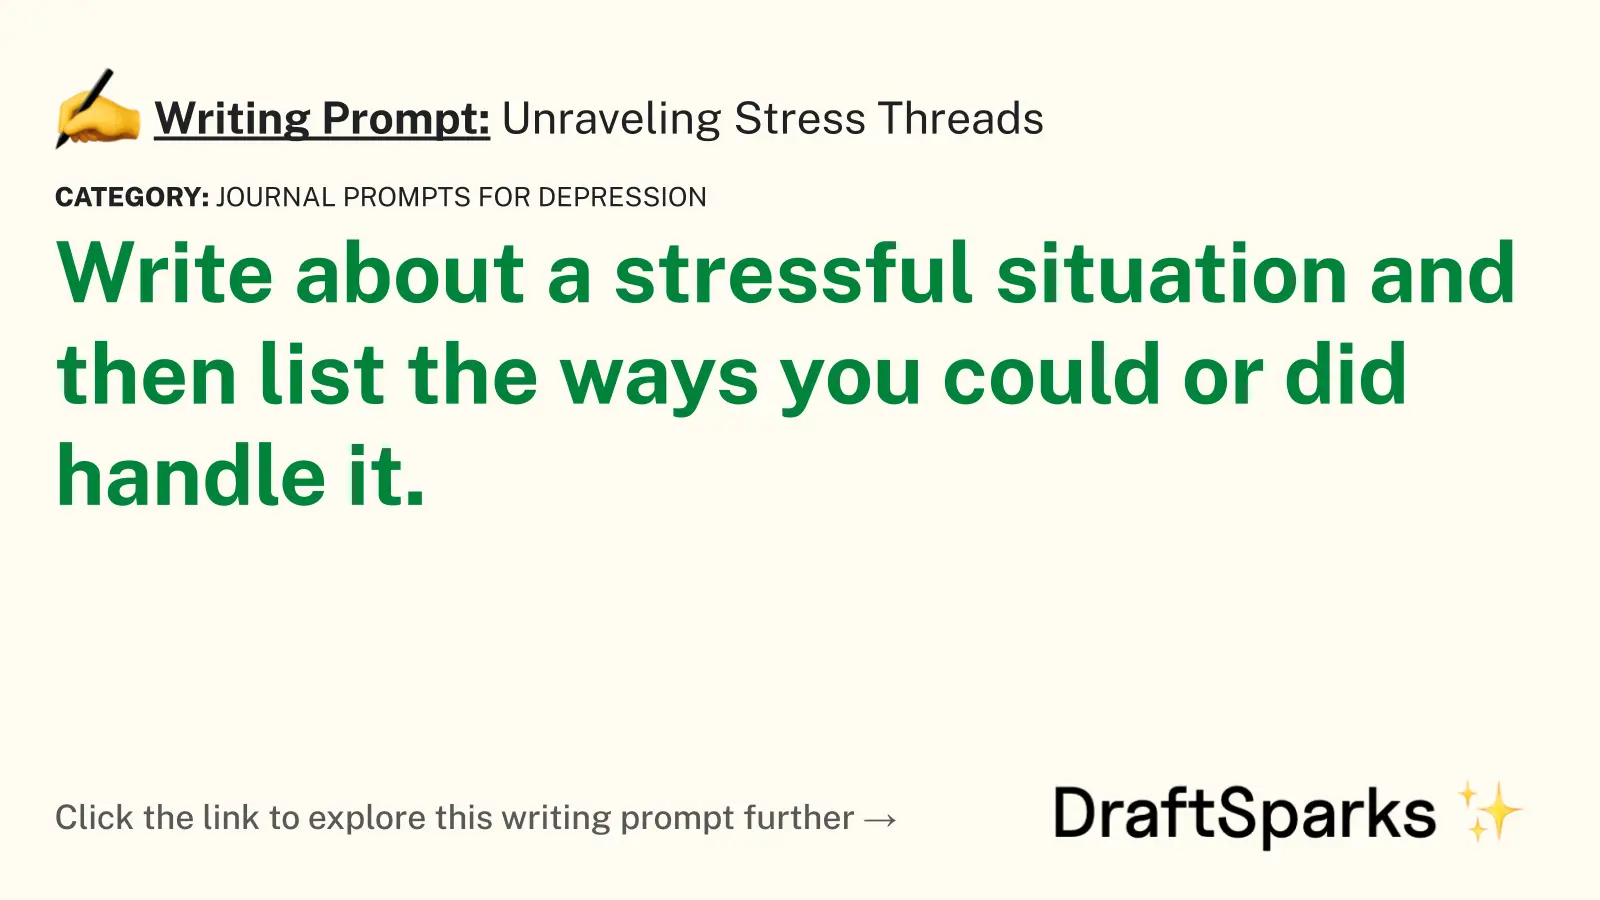 Unraveling Stress Threads